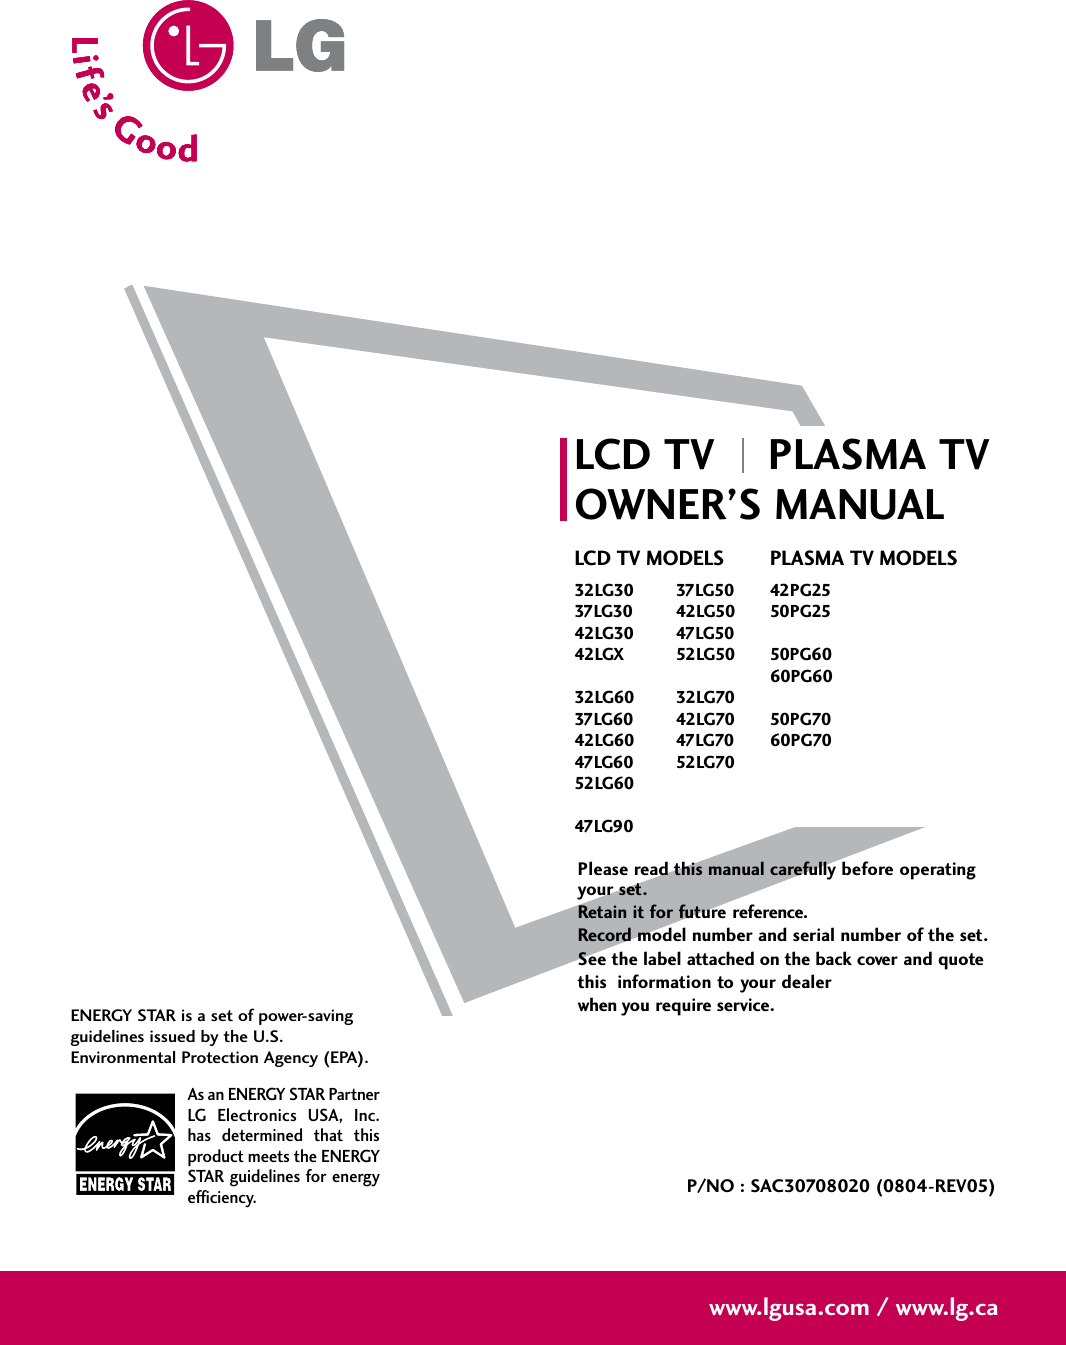 Please read this manual carefully before operatingyour set. Retain it for future reference.Record model number and serial number of the set. See the label attached on the back cover and quote this  information to your dealer when you require service.LCD TV PLASMA TVOWNER’S MANUALLCD TV MODELS32LG30 37LG5037LG30 42LG5042LG30 47LG5042LGX 52LG5032LG60 32LG7037LG60 42LG7042LG60 47LG7047LG60 52LG7052LG6047 LG 90PLASMA TV MODELS42PG2550PG2550PG6060PG6050PG7060PG70P/NO : SAC30708020 (0804-REV05)www.lgusa.com / www.lg.caAs an ENERGY STAR PartnerLG Electronics USA, Inc.has determined that thisproduct meets the ENERGYSTAR guidelines for energyefficiency.ENERGY STAR is a set of power-savingguidelines issued by the U.S.Environmental Protection Agency (EPA).